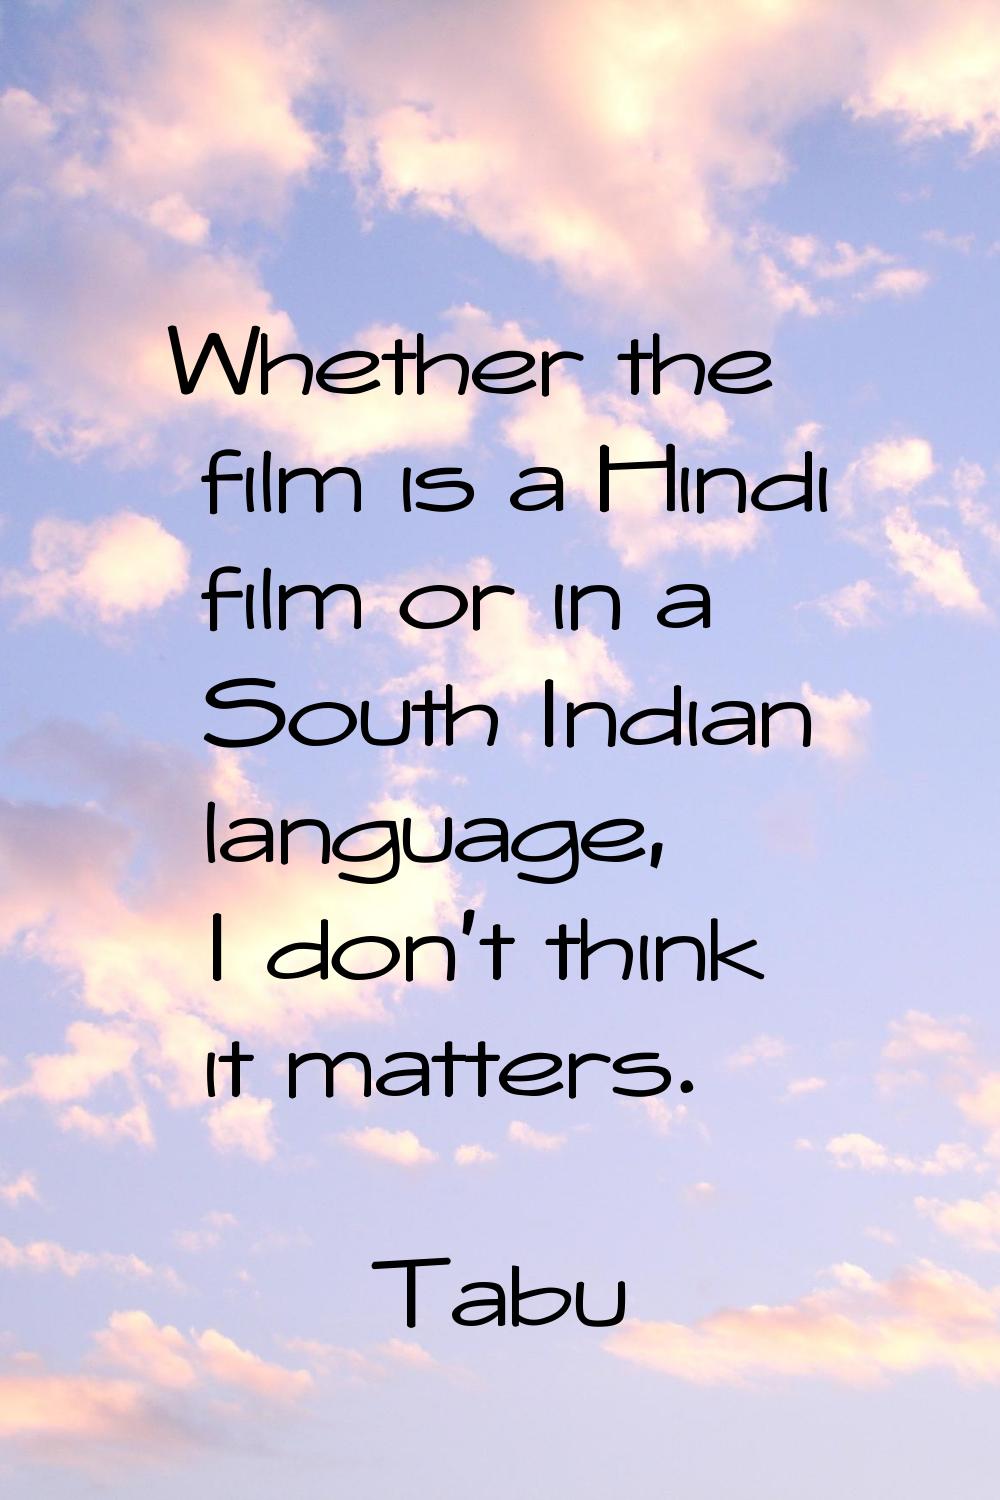 Whether the film is a Hindi film or in a South Indian language, I don't think it matters.